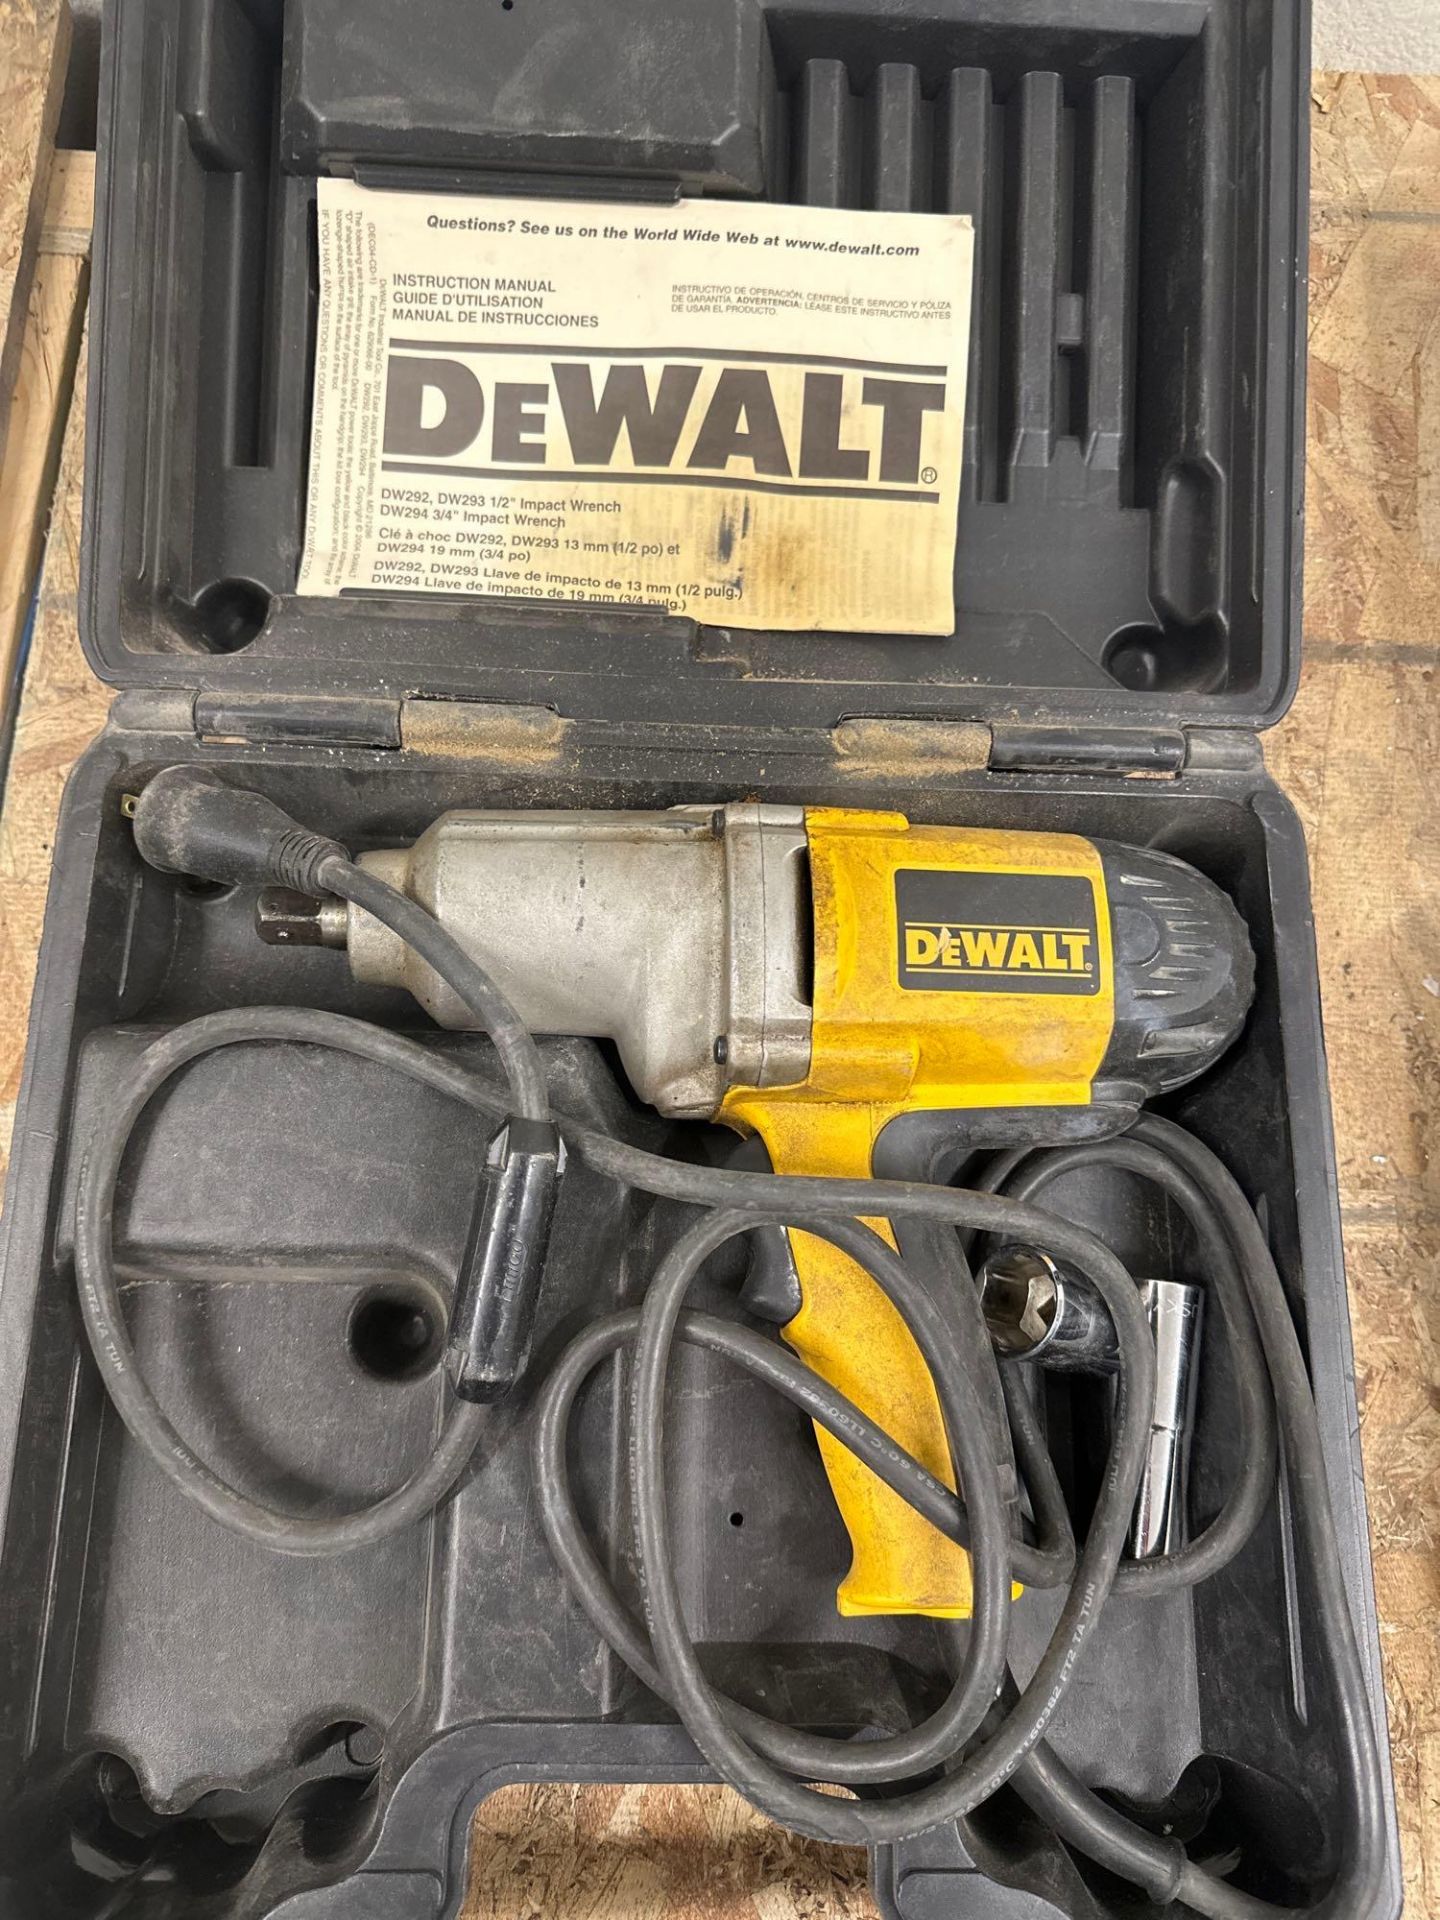 DEWALT IMPACT WRENCH AND CHICAGO ELECTRIC 1/2” ELECTRIC IMPACT WRENCH - Image 2 of 5